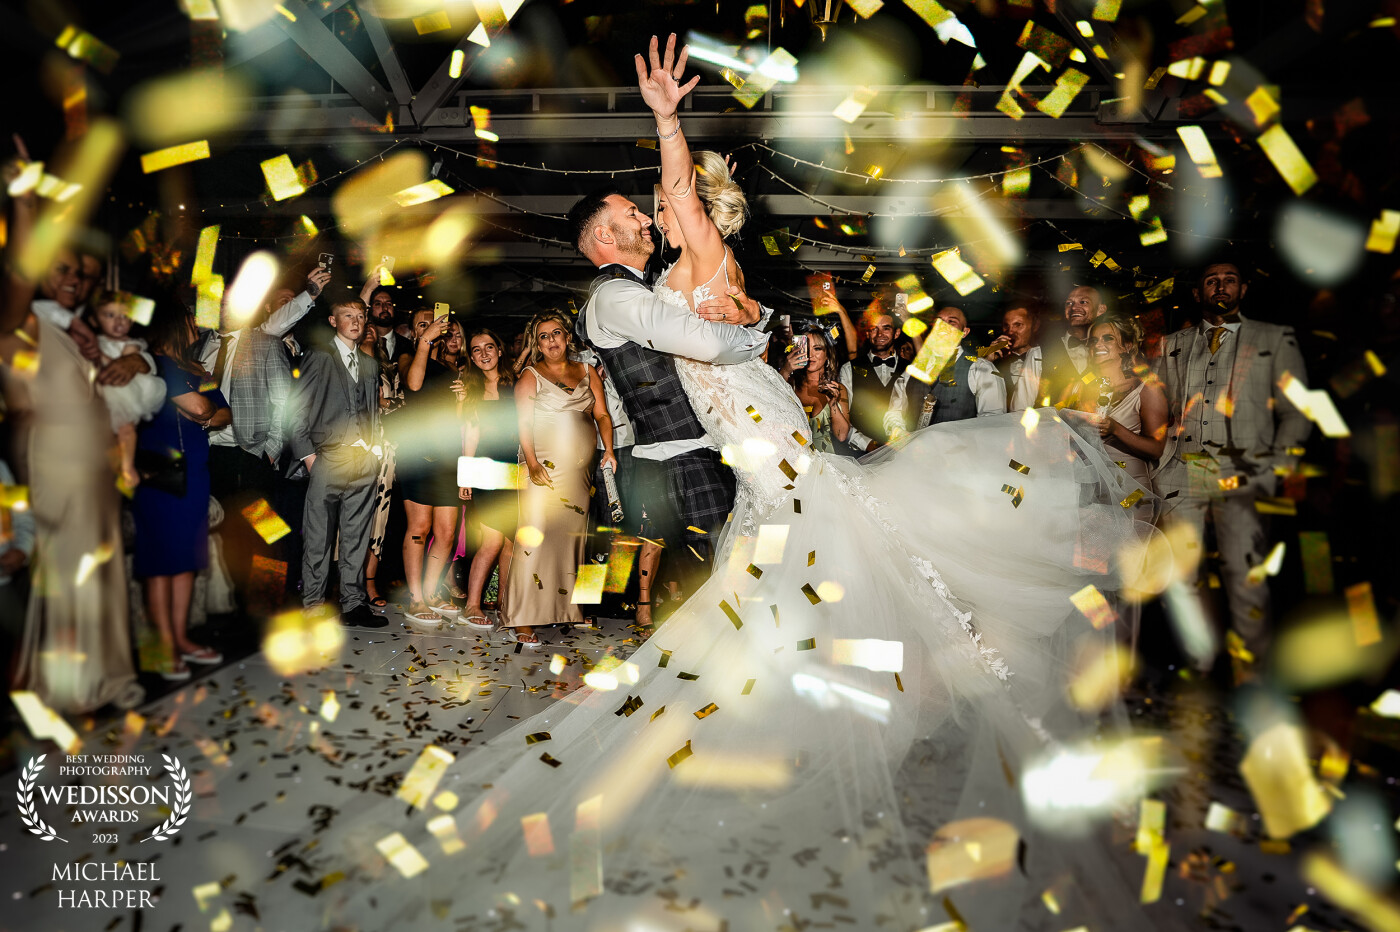 confetti madness! in the final moments of the first dance, the groom picked up the bride and spun around. At the same, a wave of confetti was shot out of cannons which was captured perfectly in this picture!